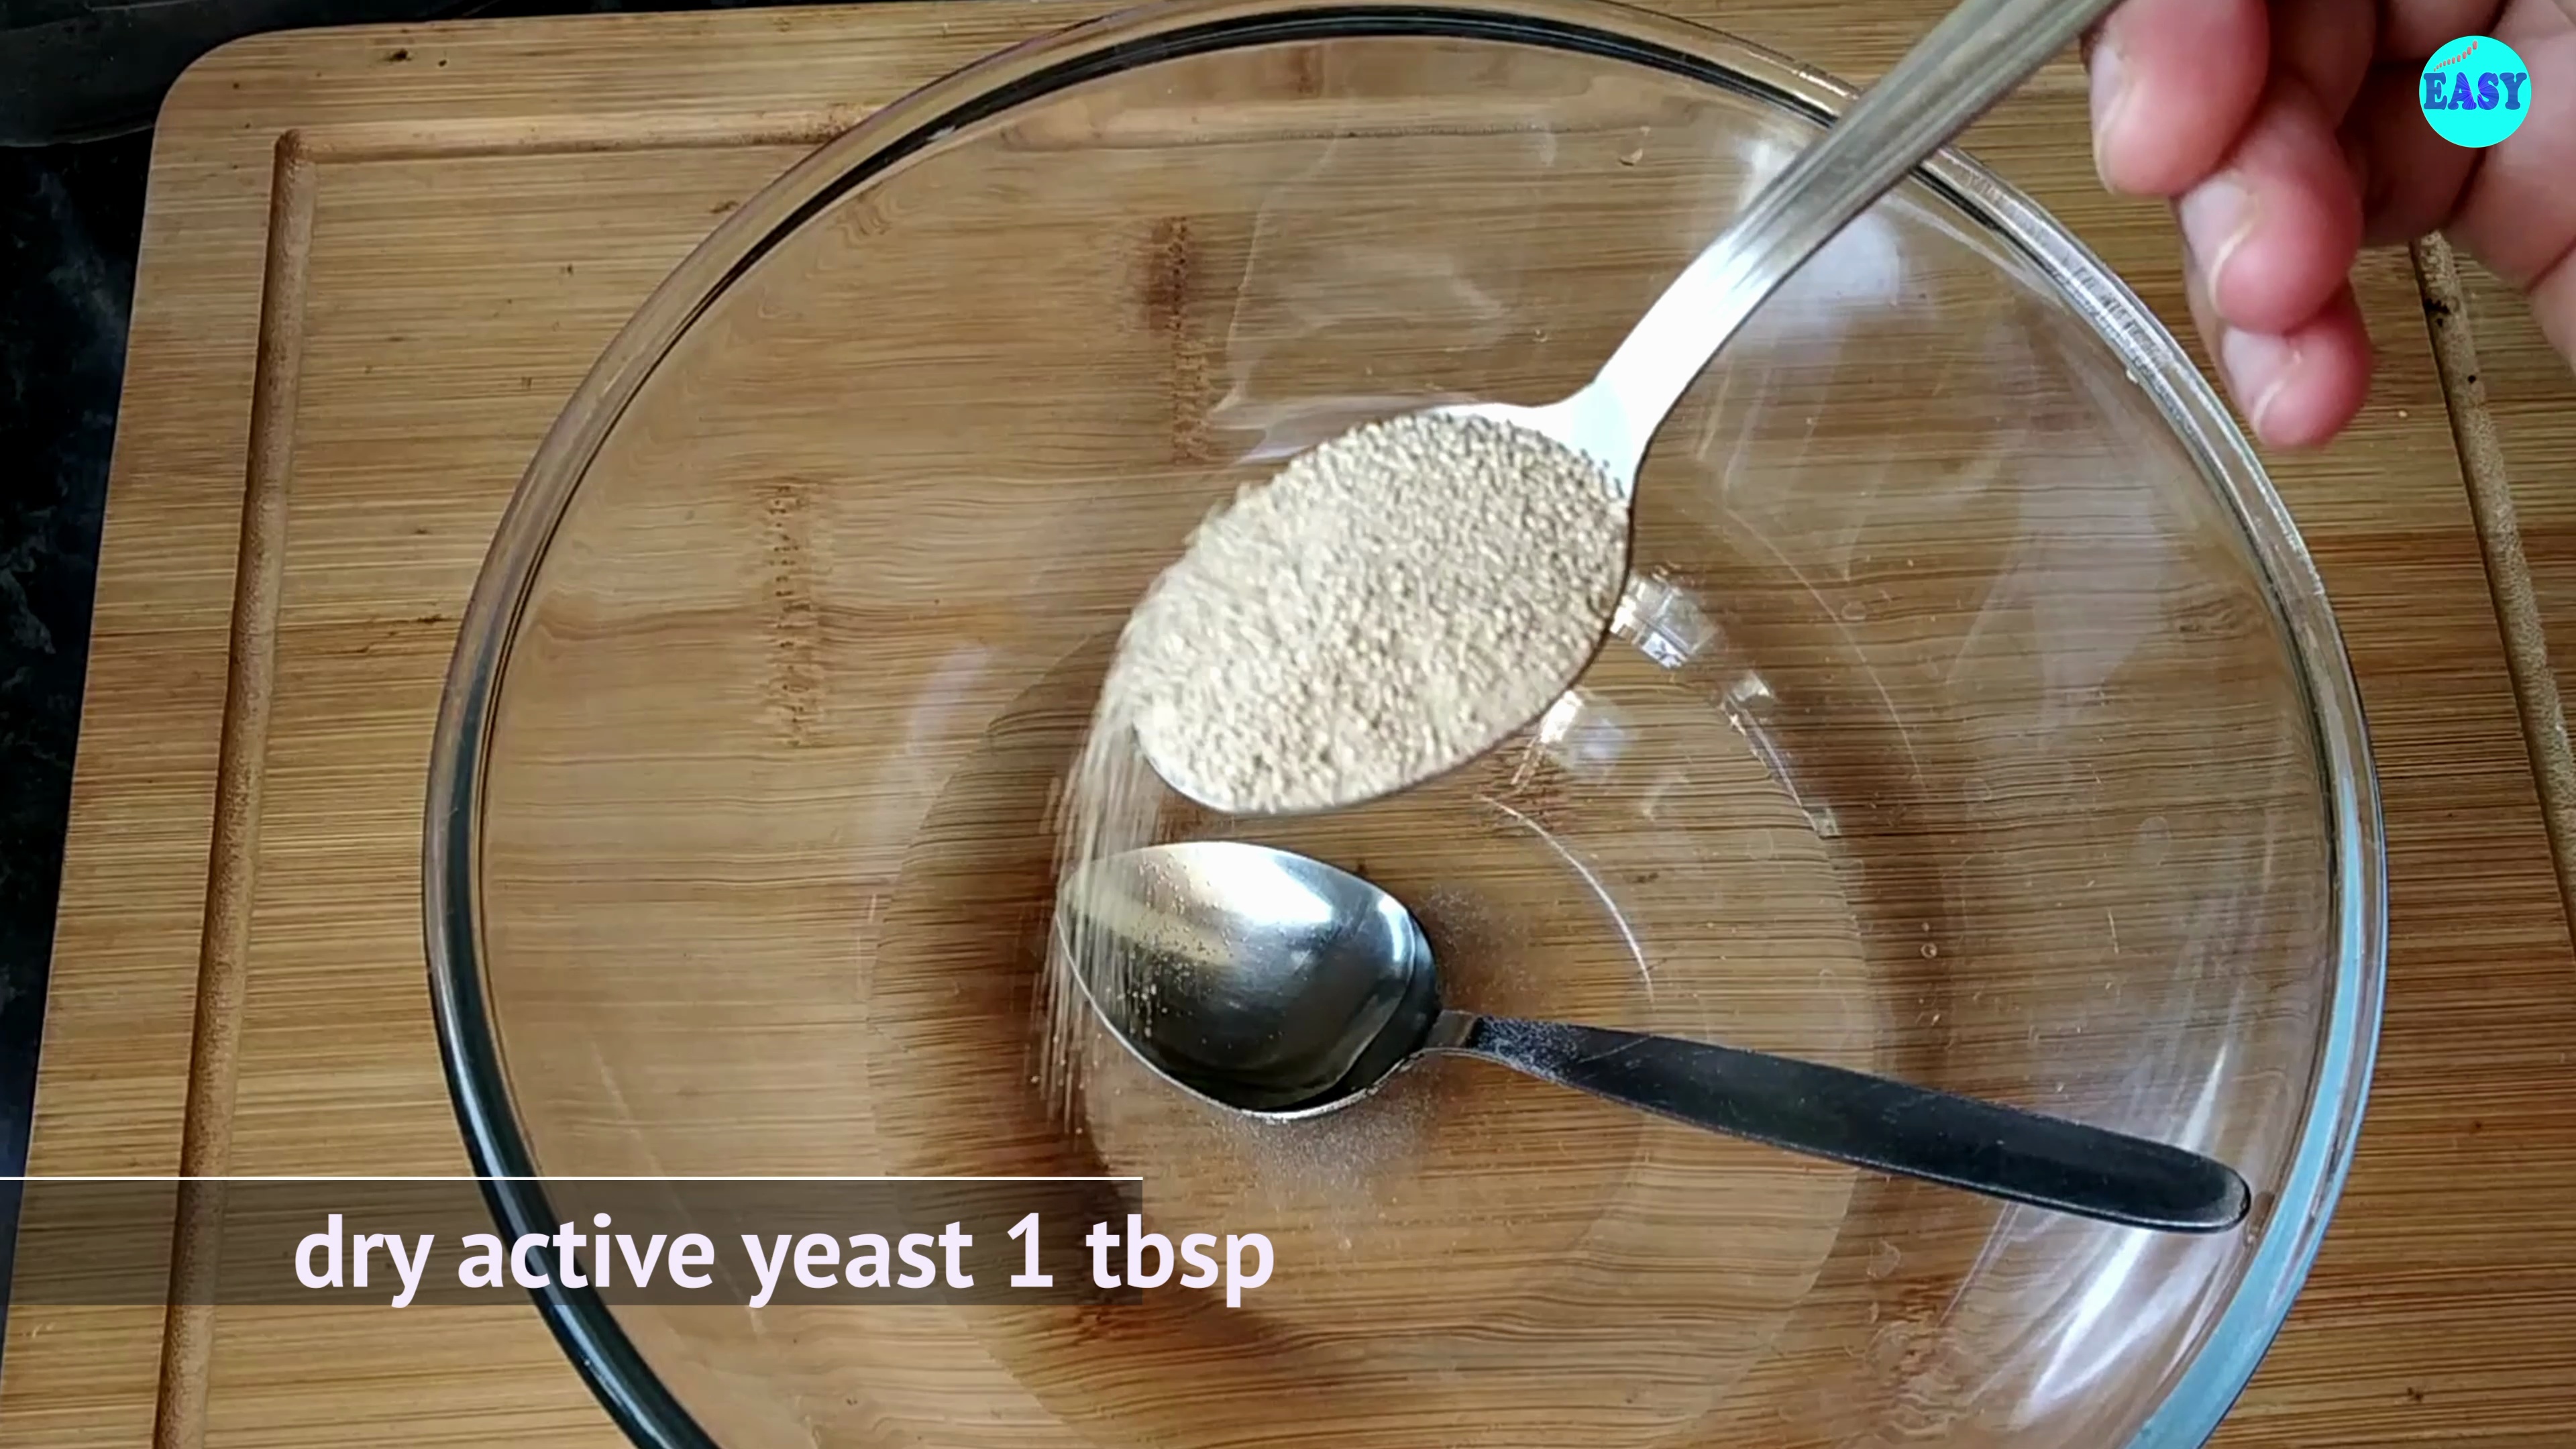 Step 1 - In a large mixing bowl, combine the water, sugar, and yeast. Cover and set aside for 5 minutes.